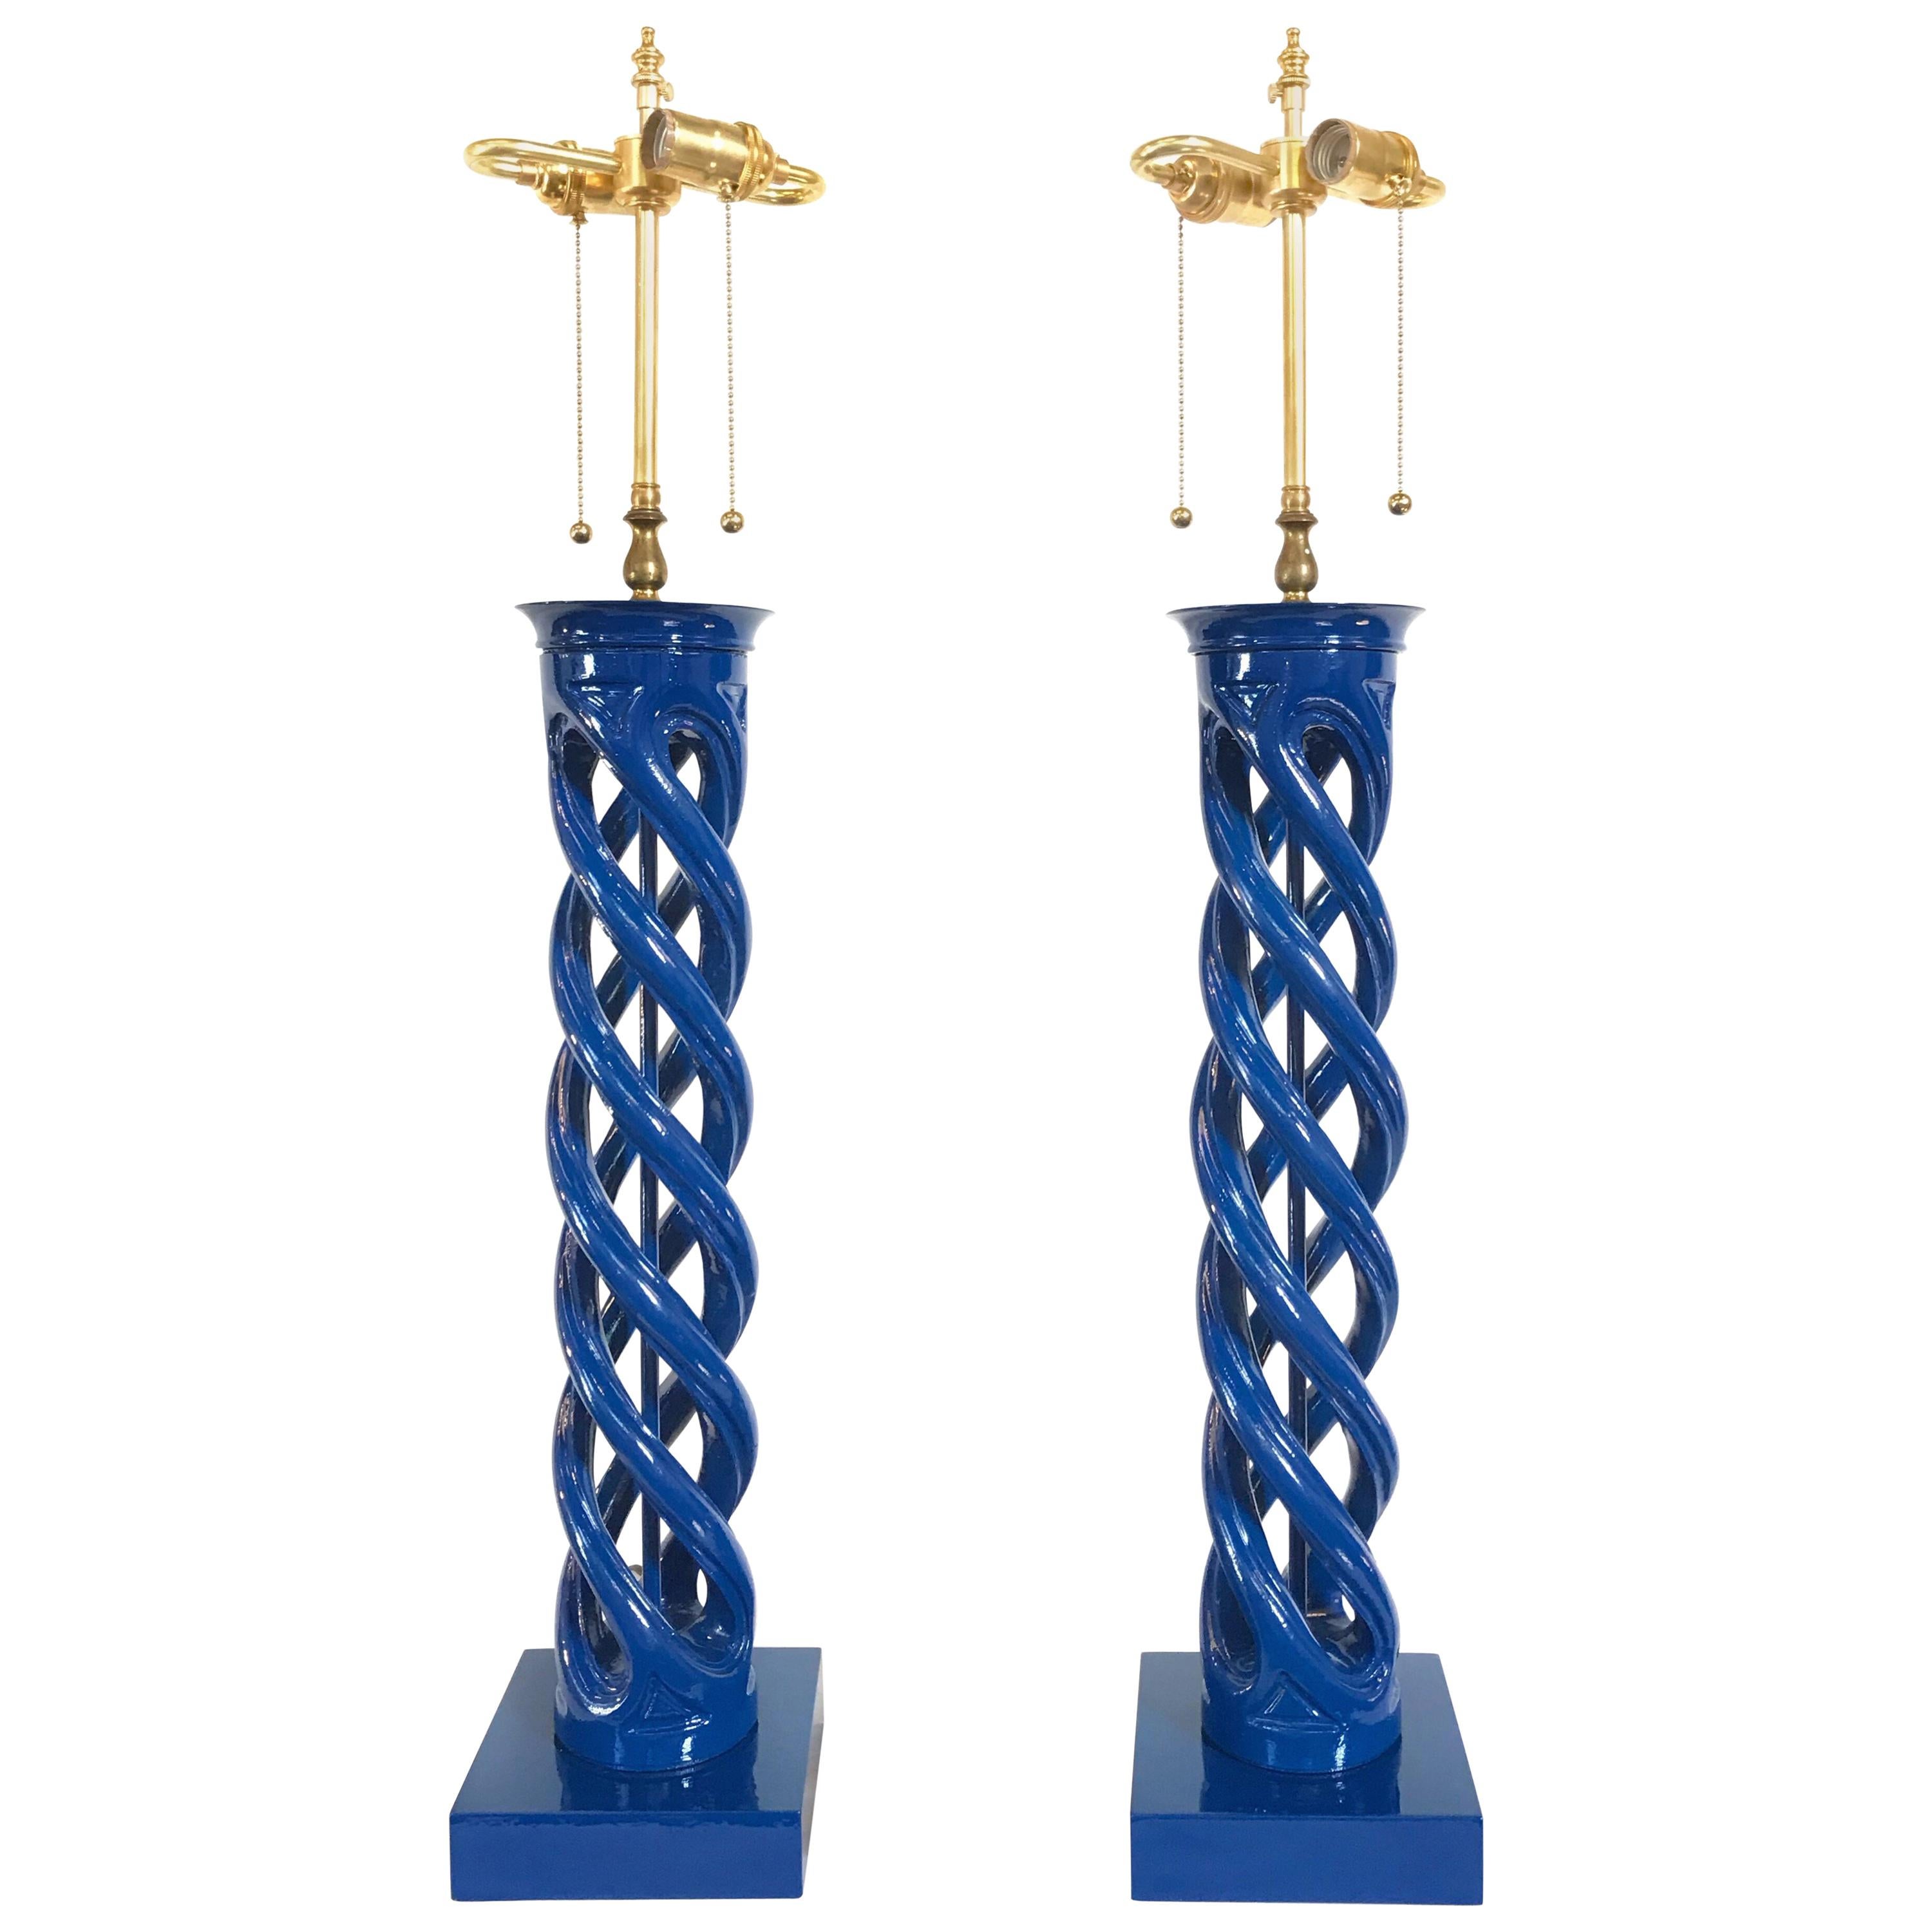 Mid-Century Modern Frederick Cooper Double Helix Form Lamps, a Pair For Sale